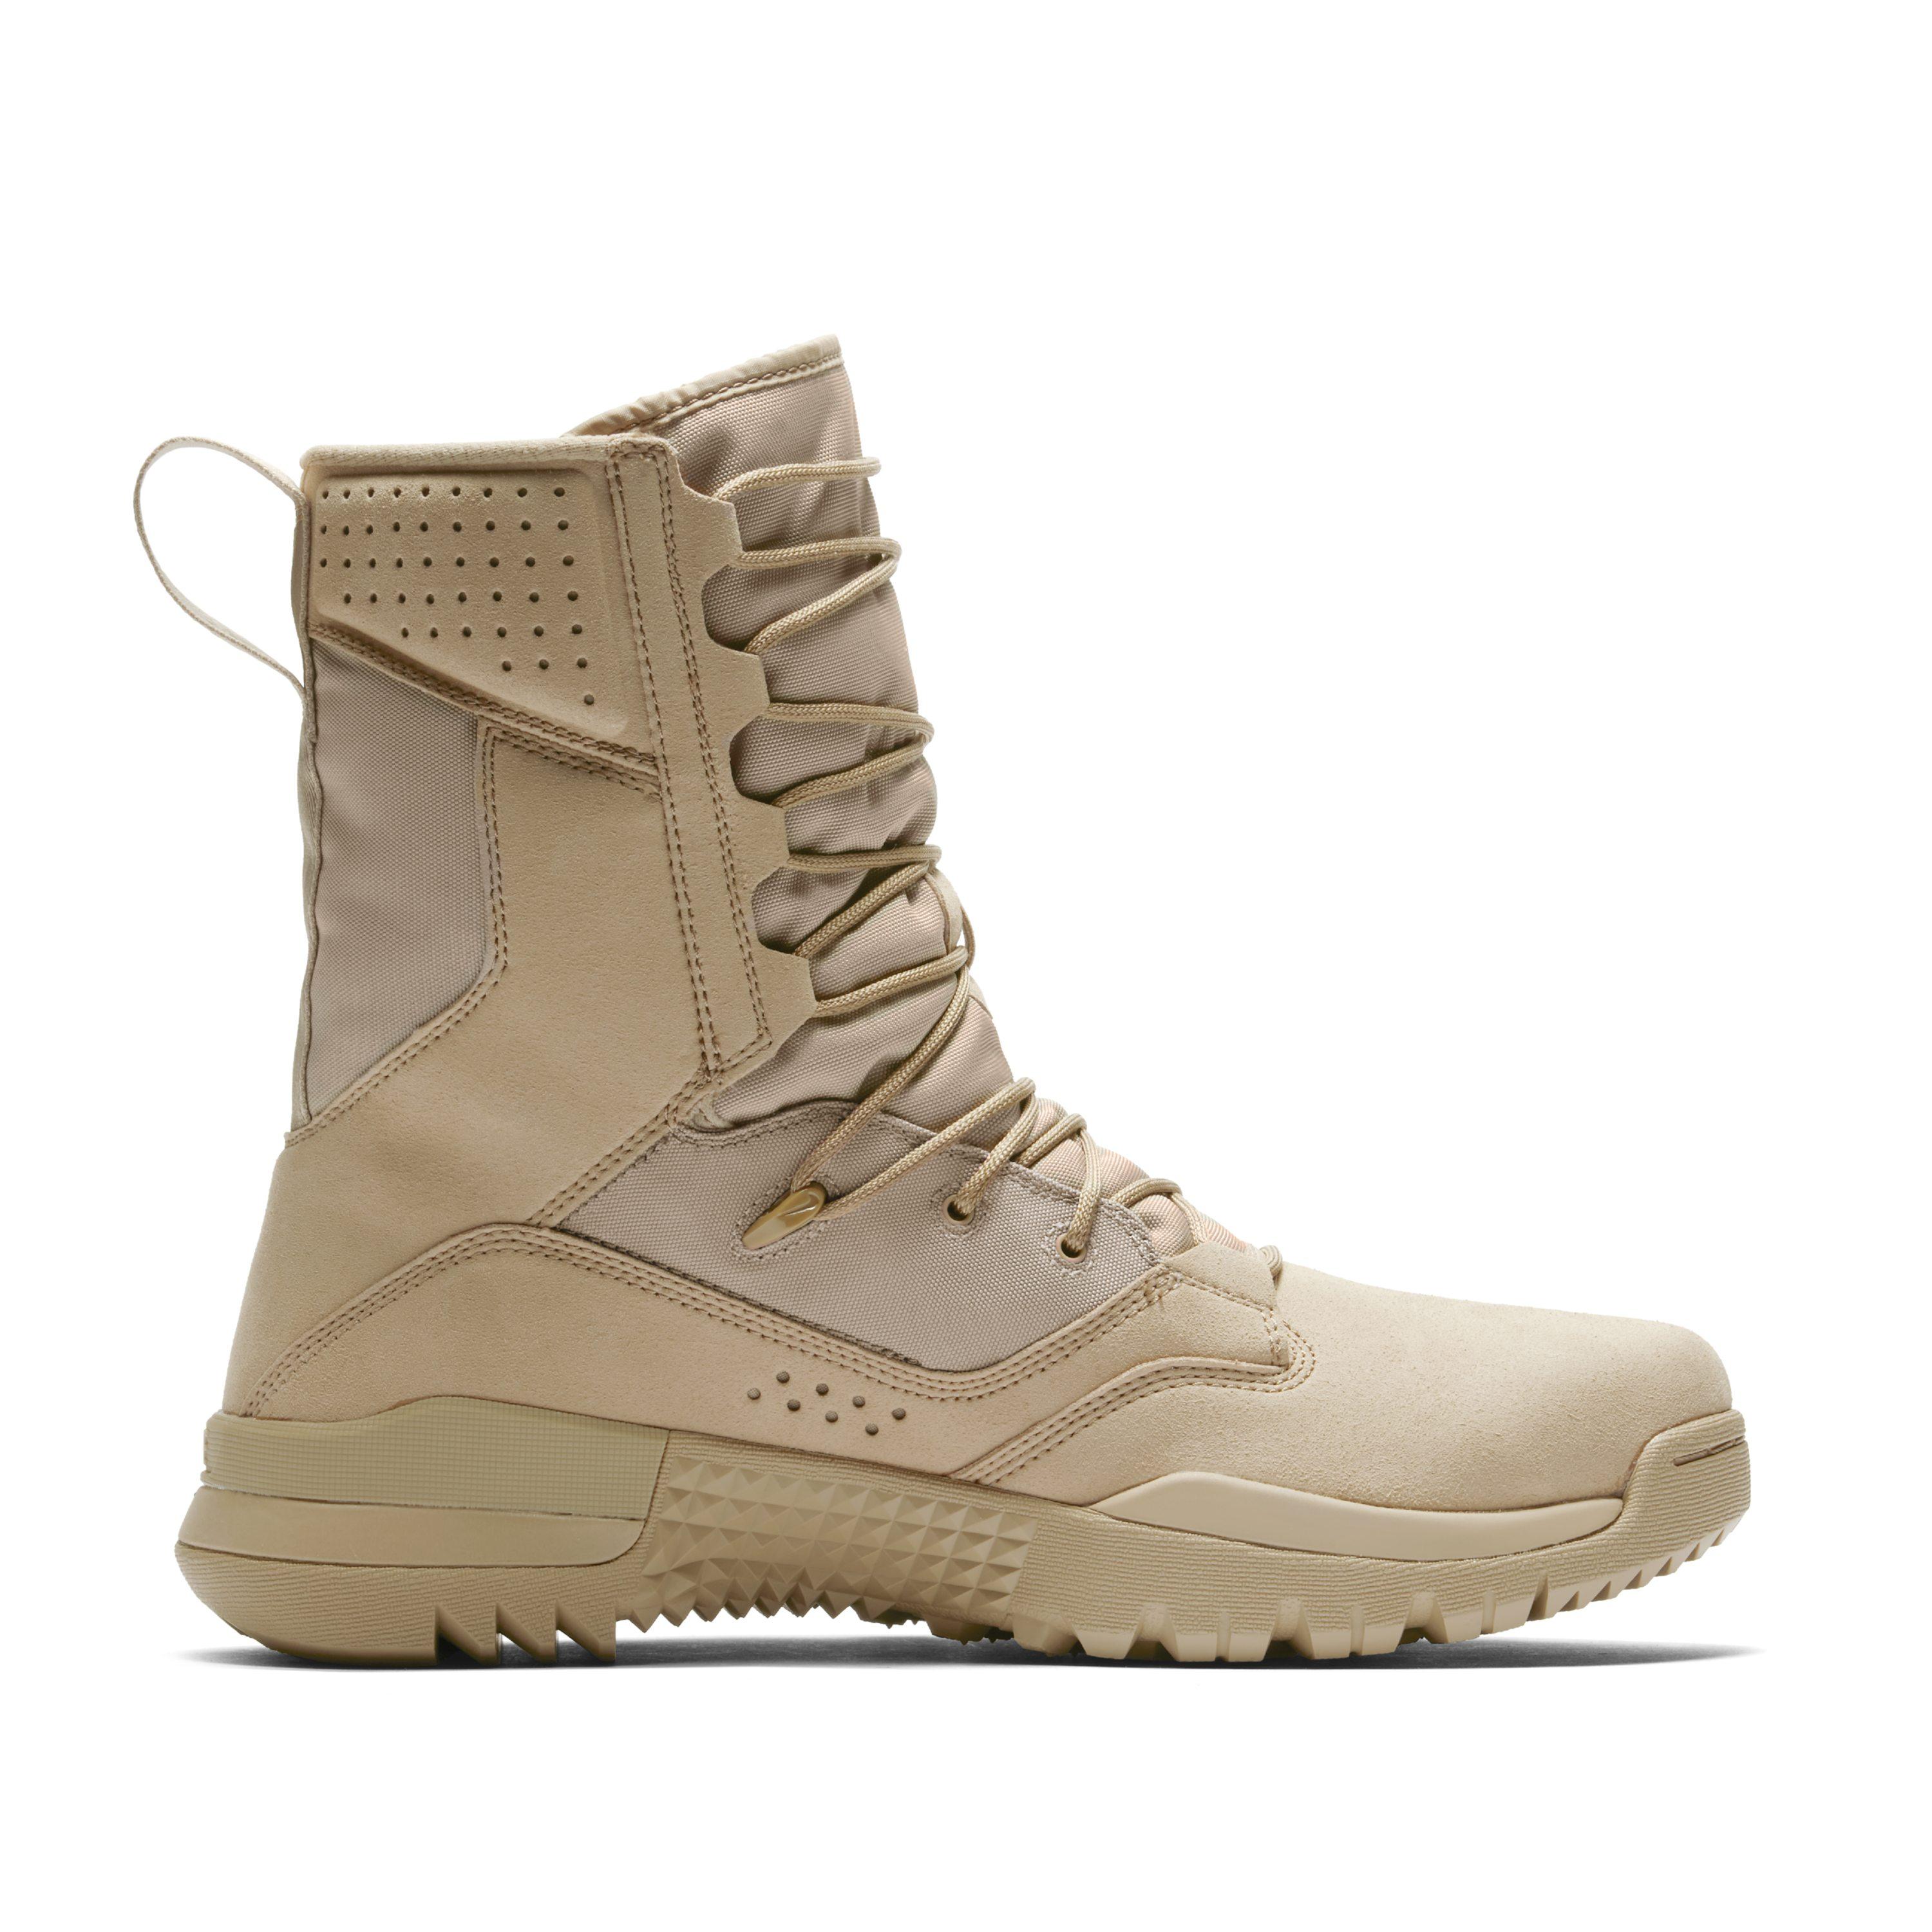 Nike Lace Sfb Field 2 20cm (approx.) Tactical Boot in Brown for Men - Lyst